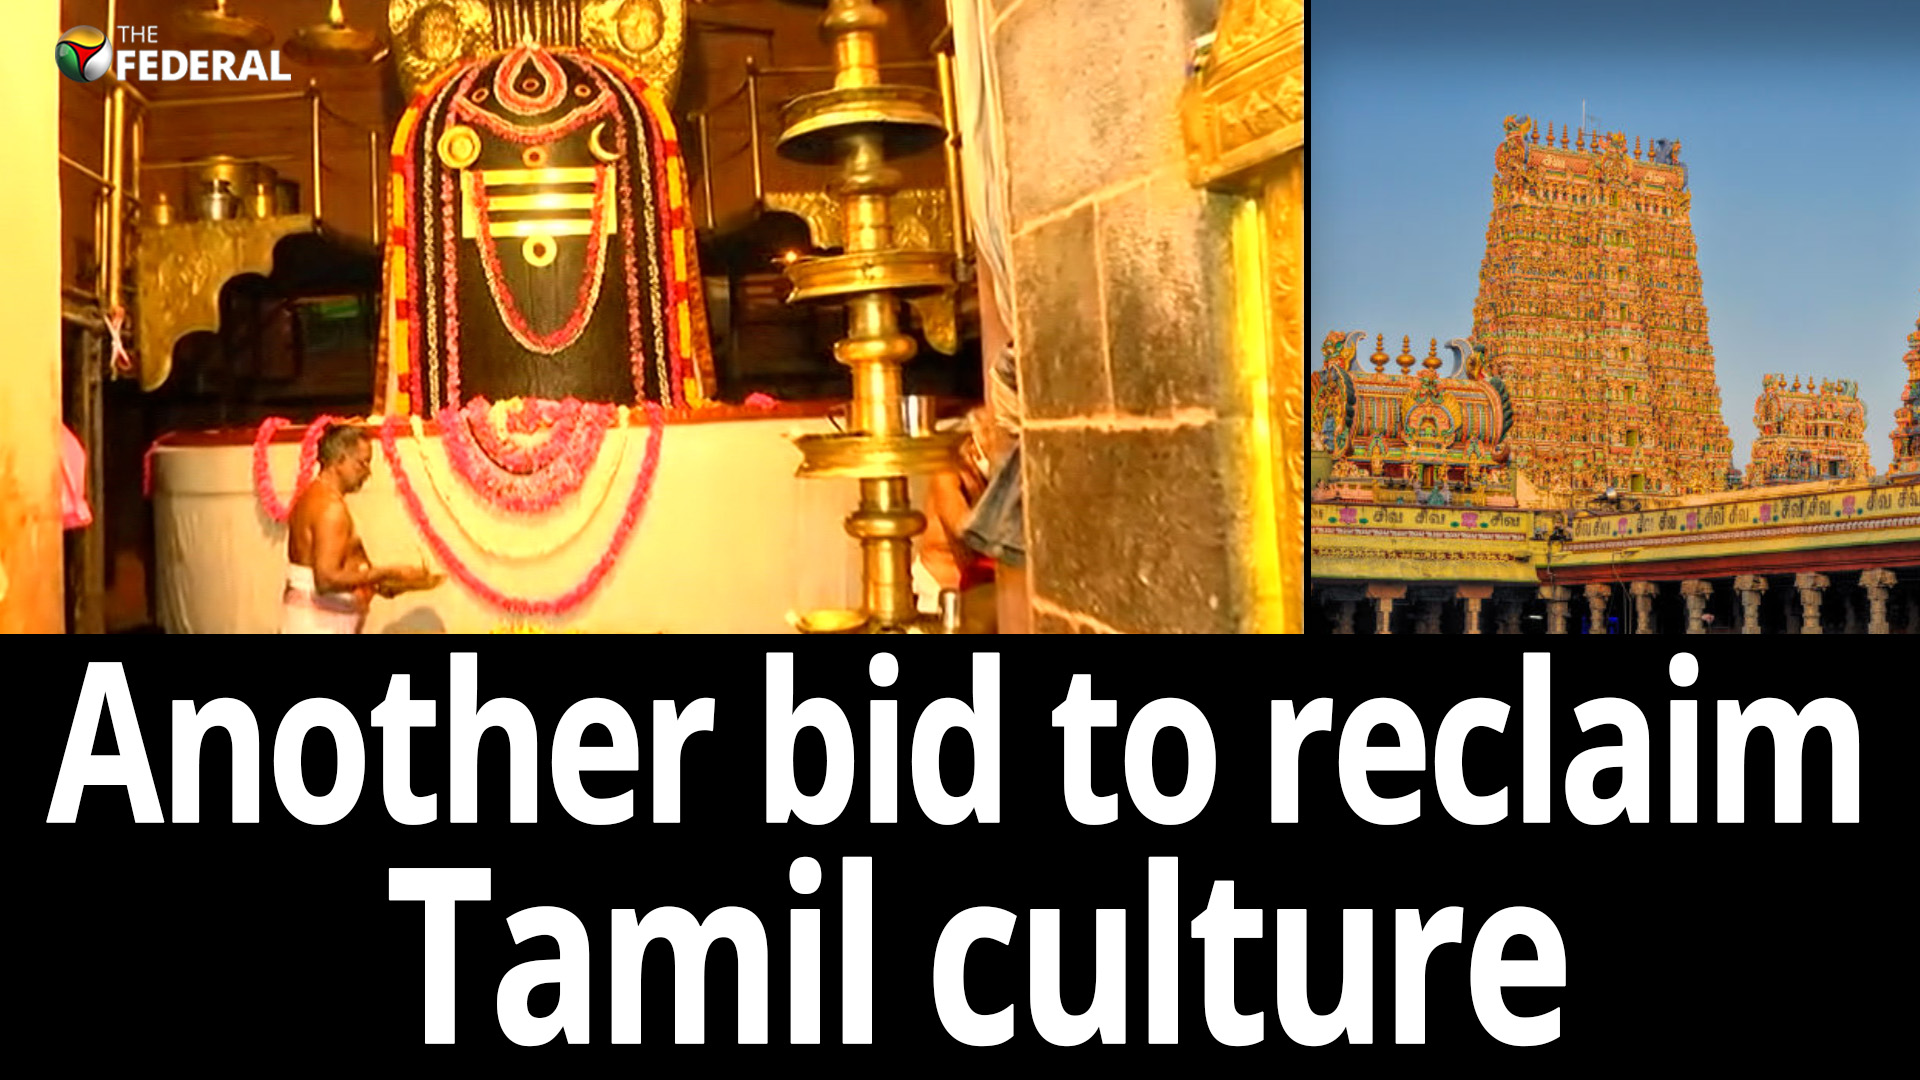 Temple worship in Tamil an attempt to reclaim culture within religious space | The Federal